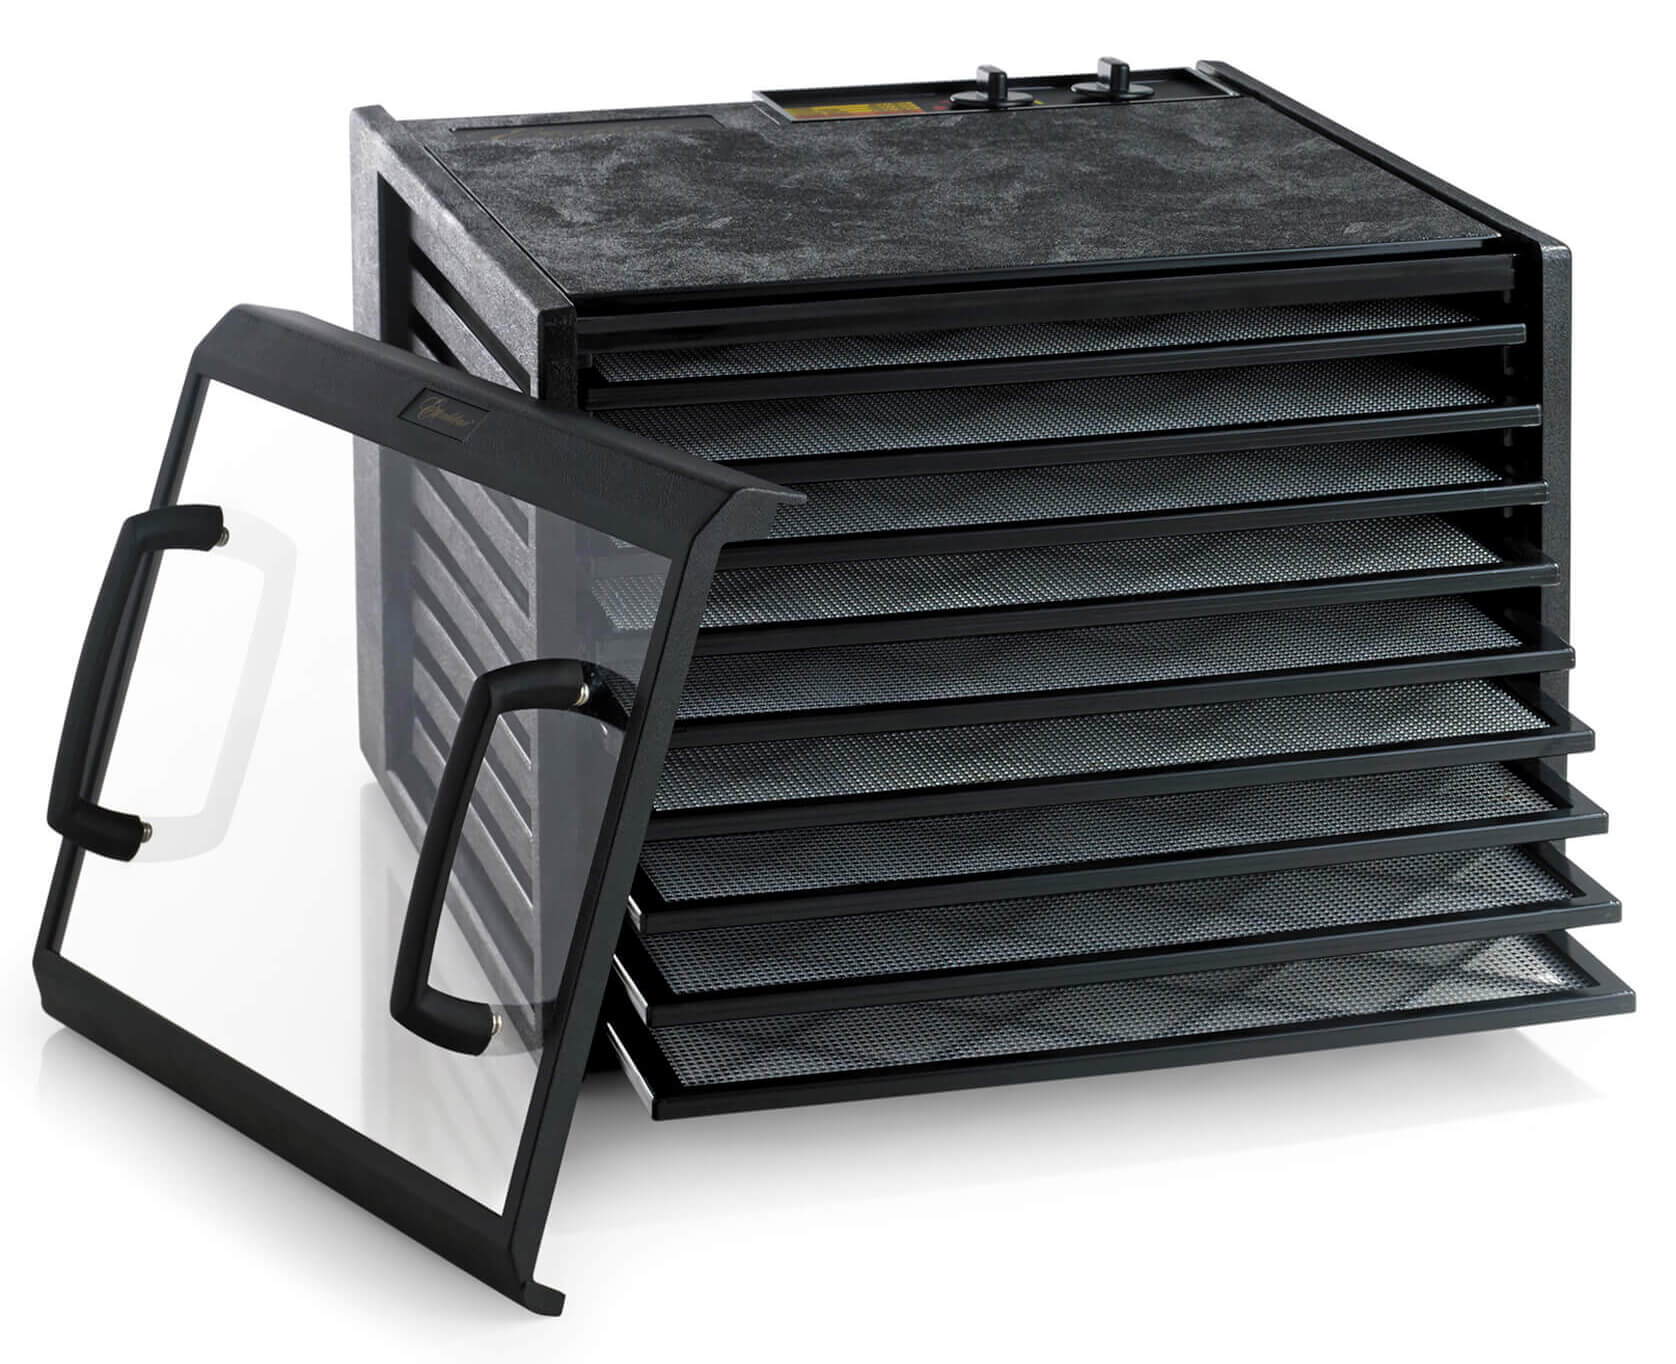 Excalibur 4926TCDB 9 tray dehydrator with clear door propped to the side and trays pulled out.